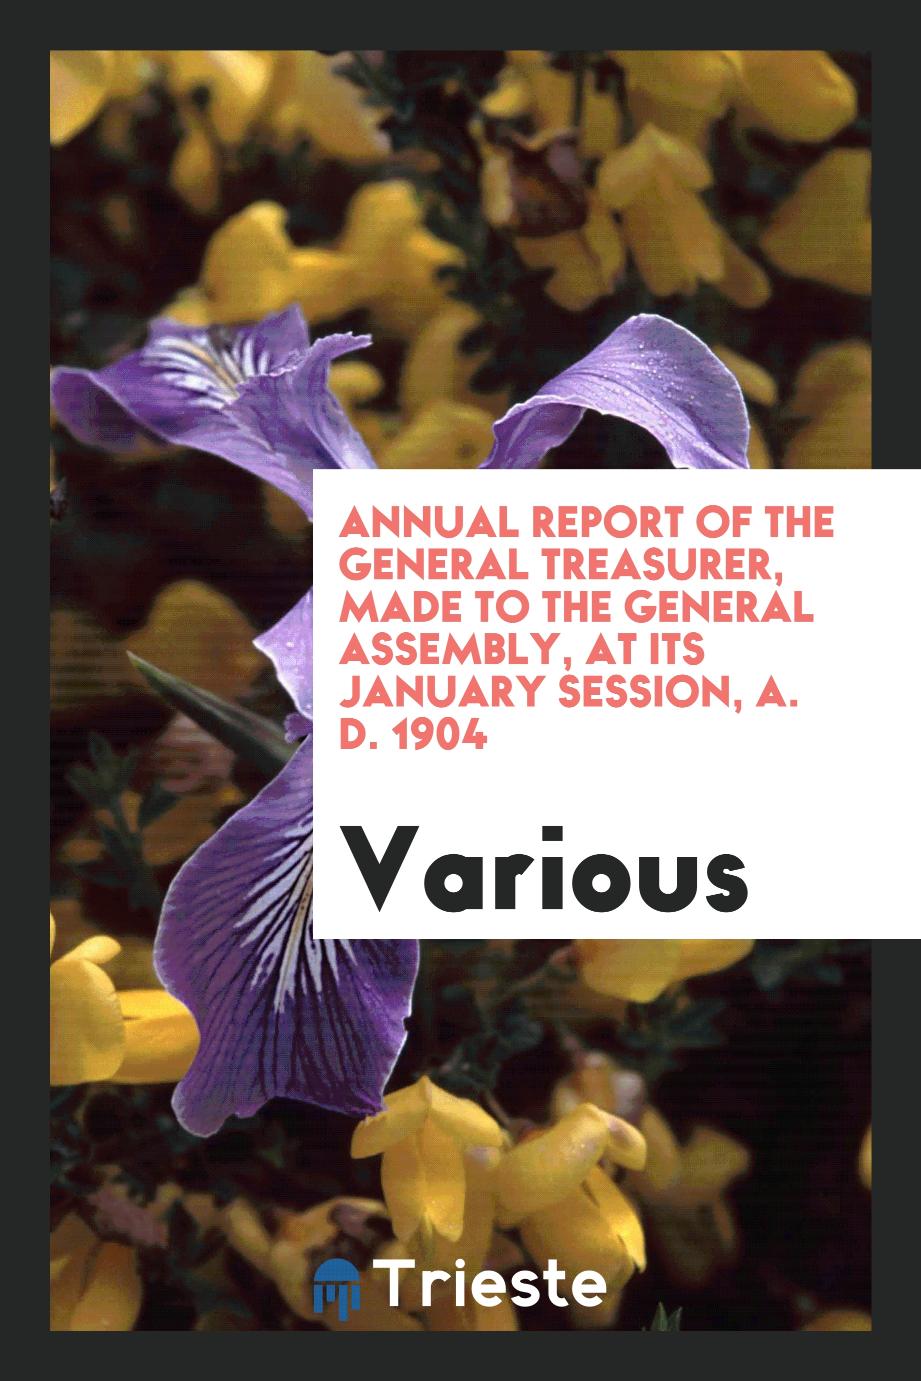 Annual Report of the General Treasurer, Made to the General Assembly, at its January session, A. D. 1904